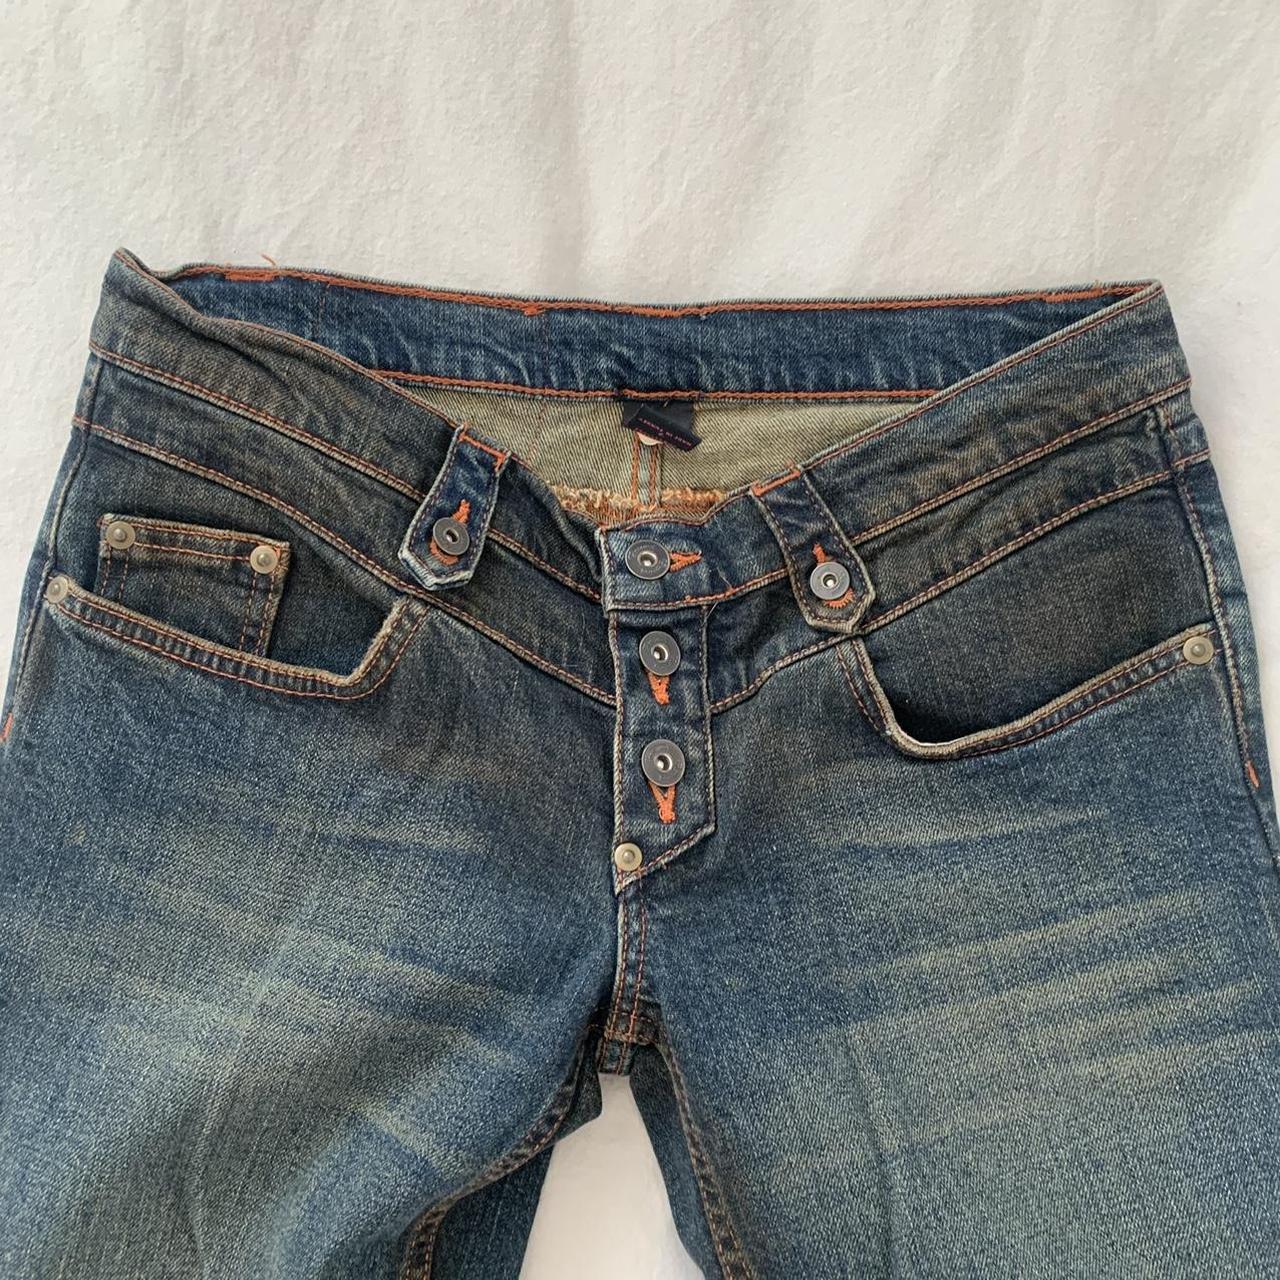 rise Fiorucci with... Depop - low Vintage jeans distressed